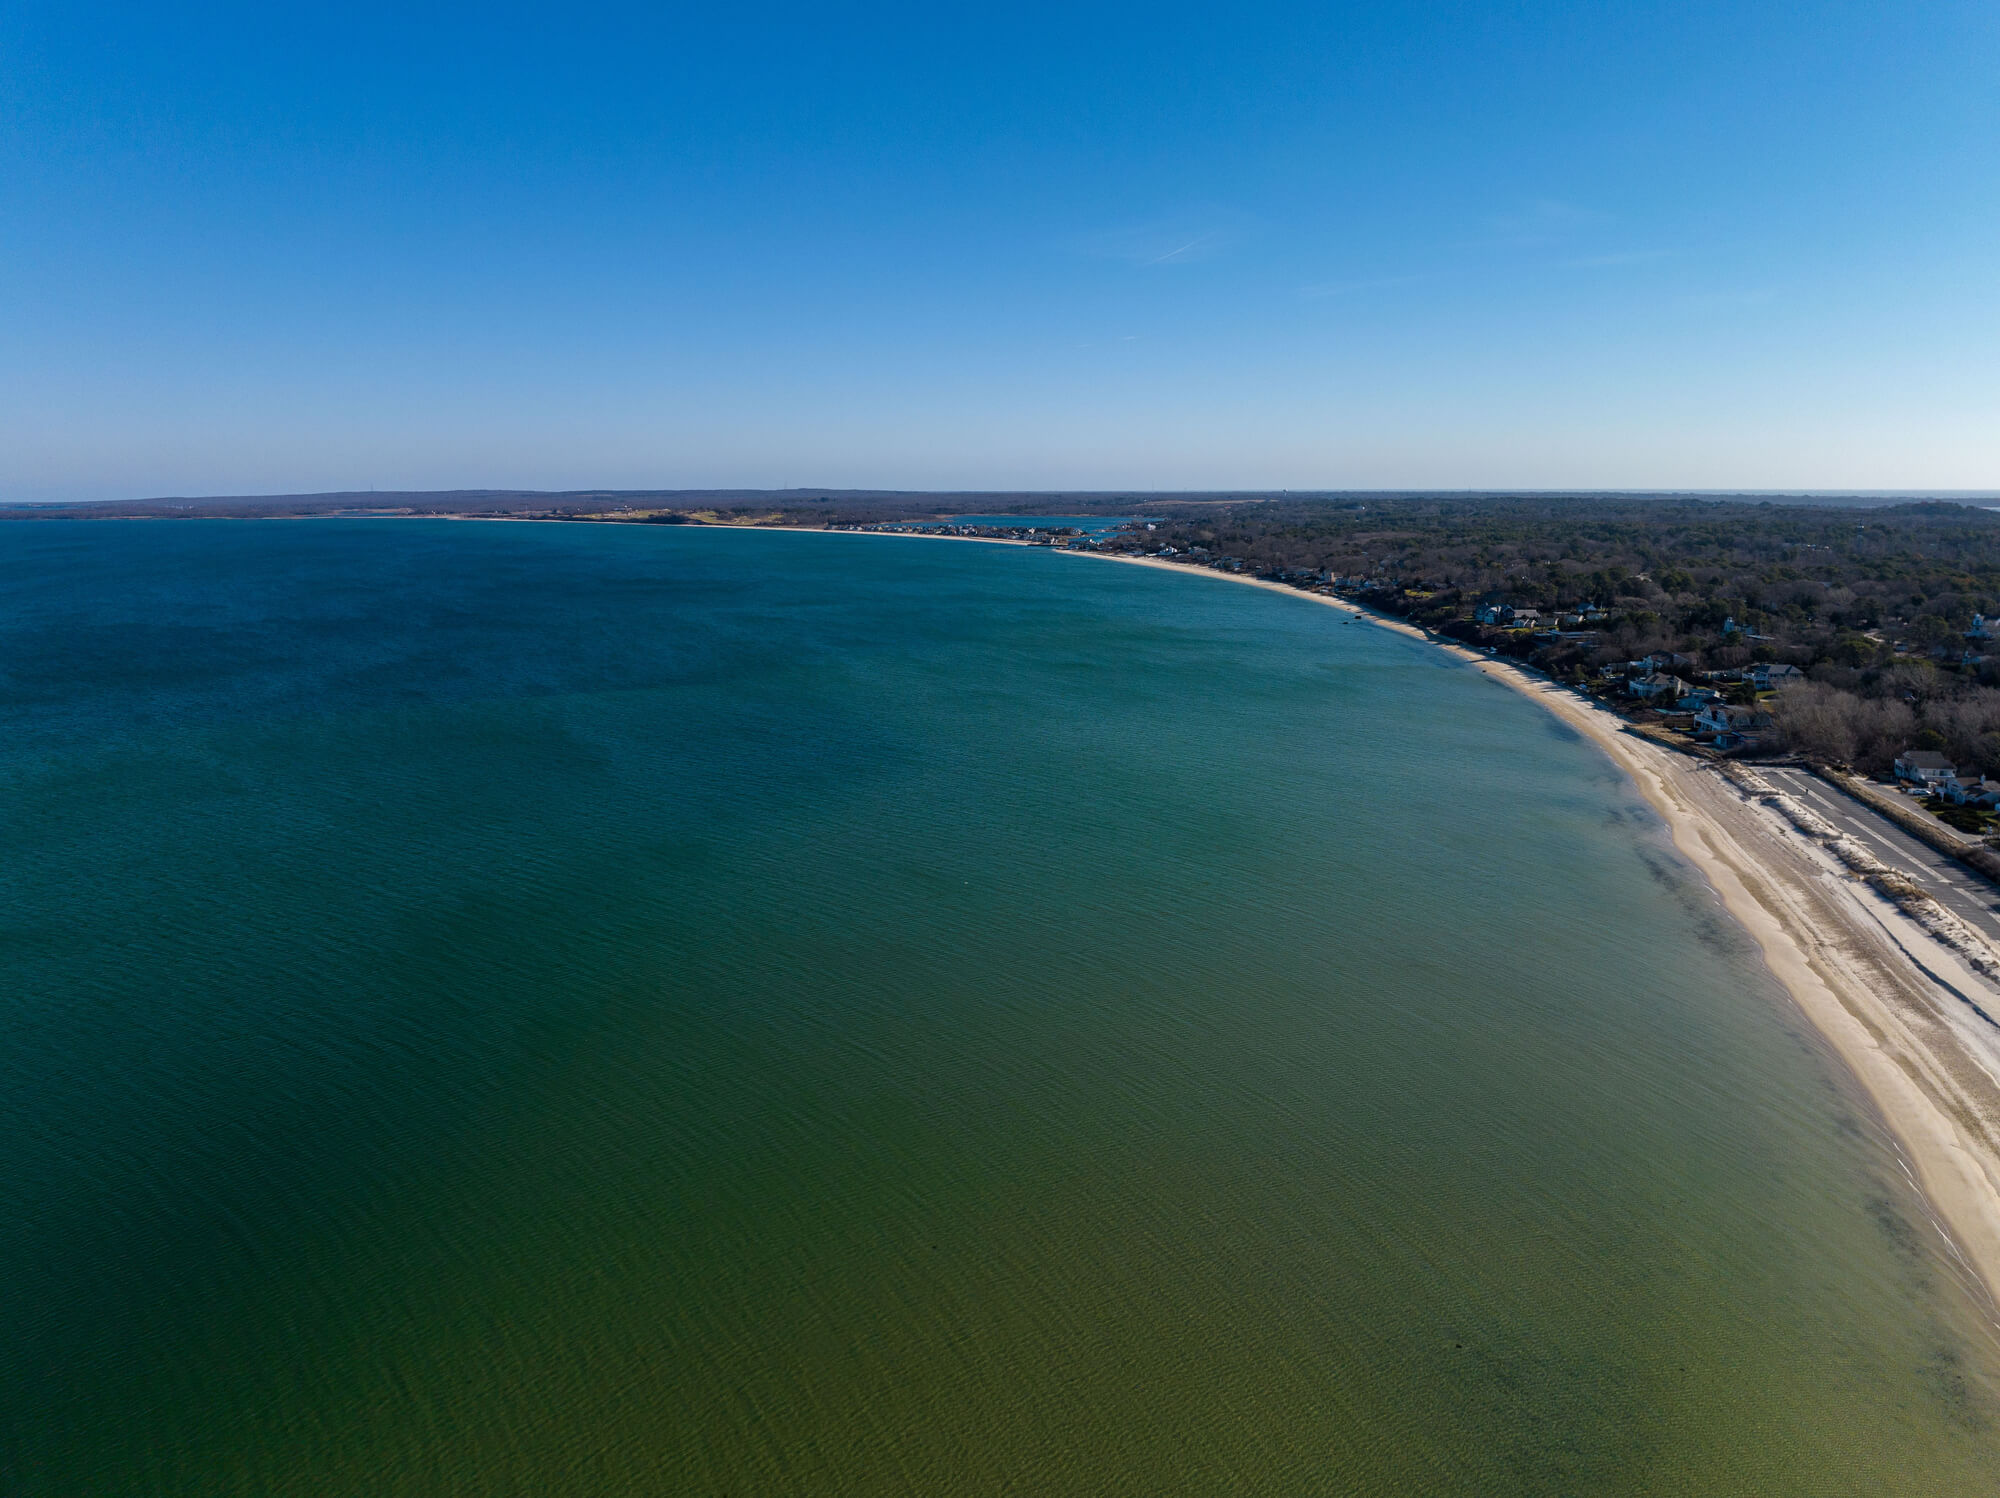 An aerial of the sandy Meschutt Beach and the Great Peconic Bay on Long Island on a sunny day - great for seaweed growth